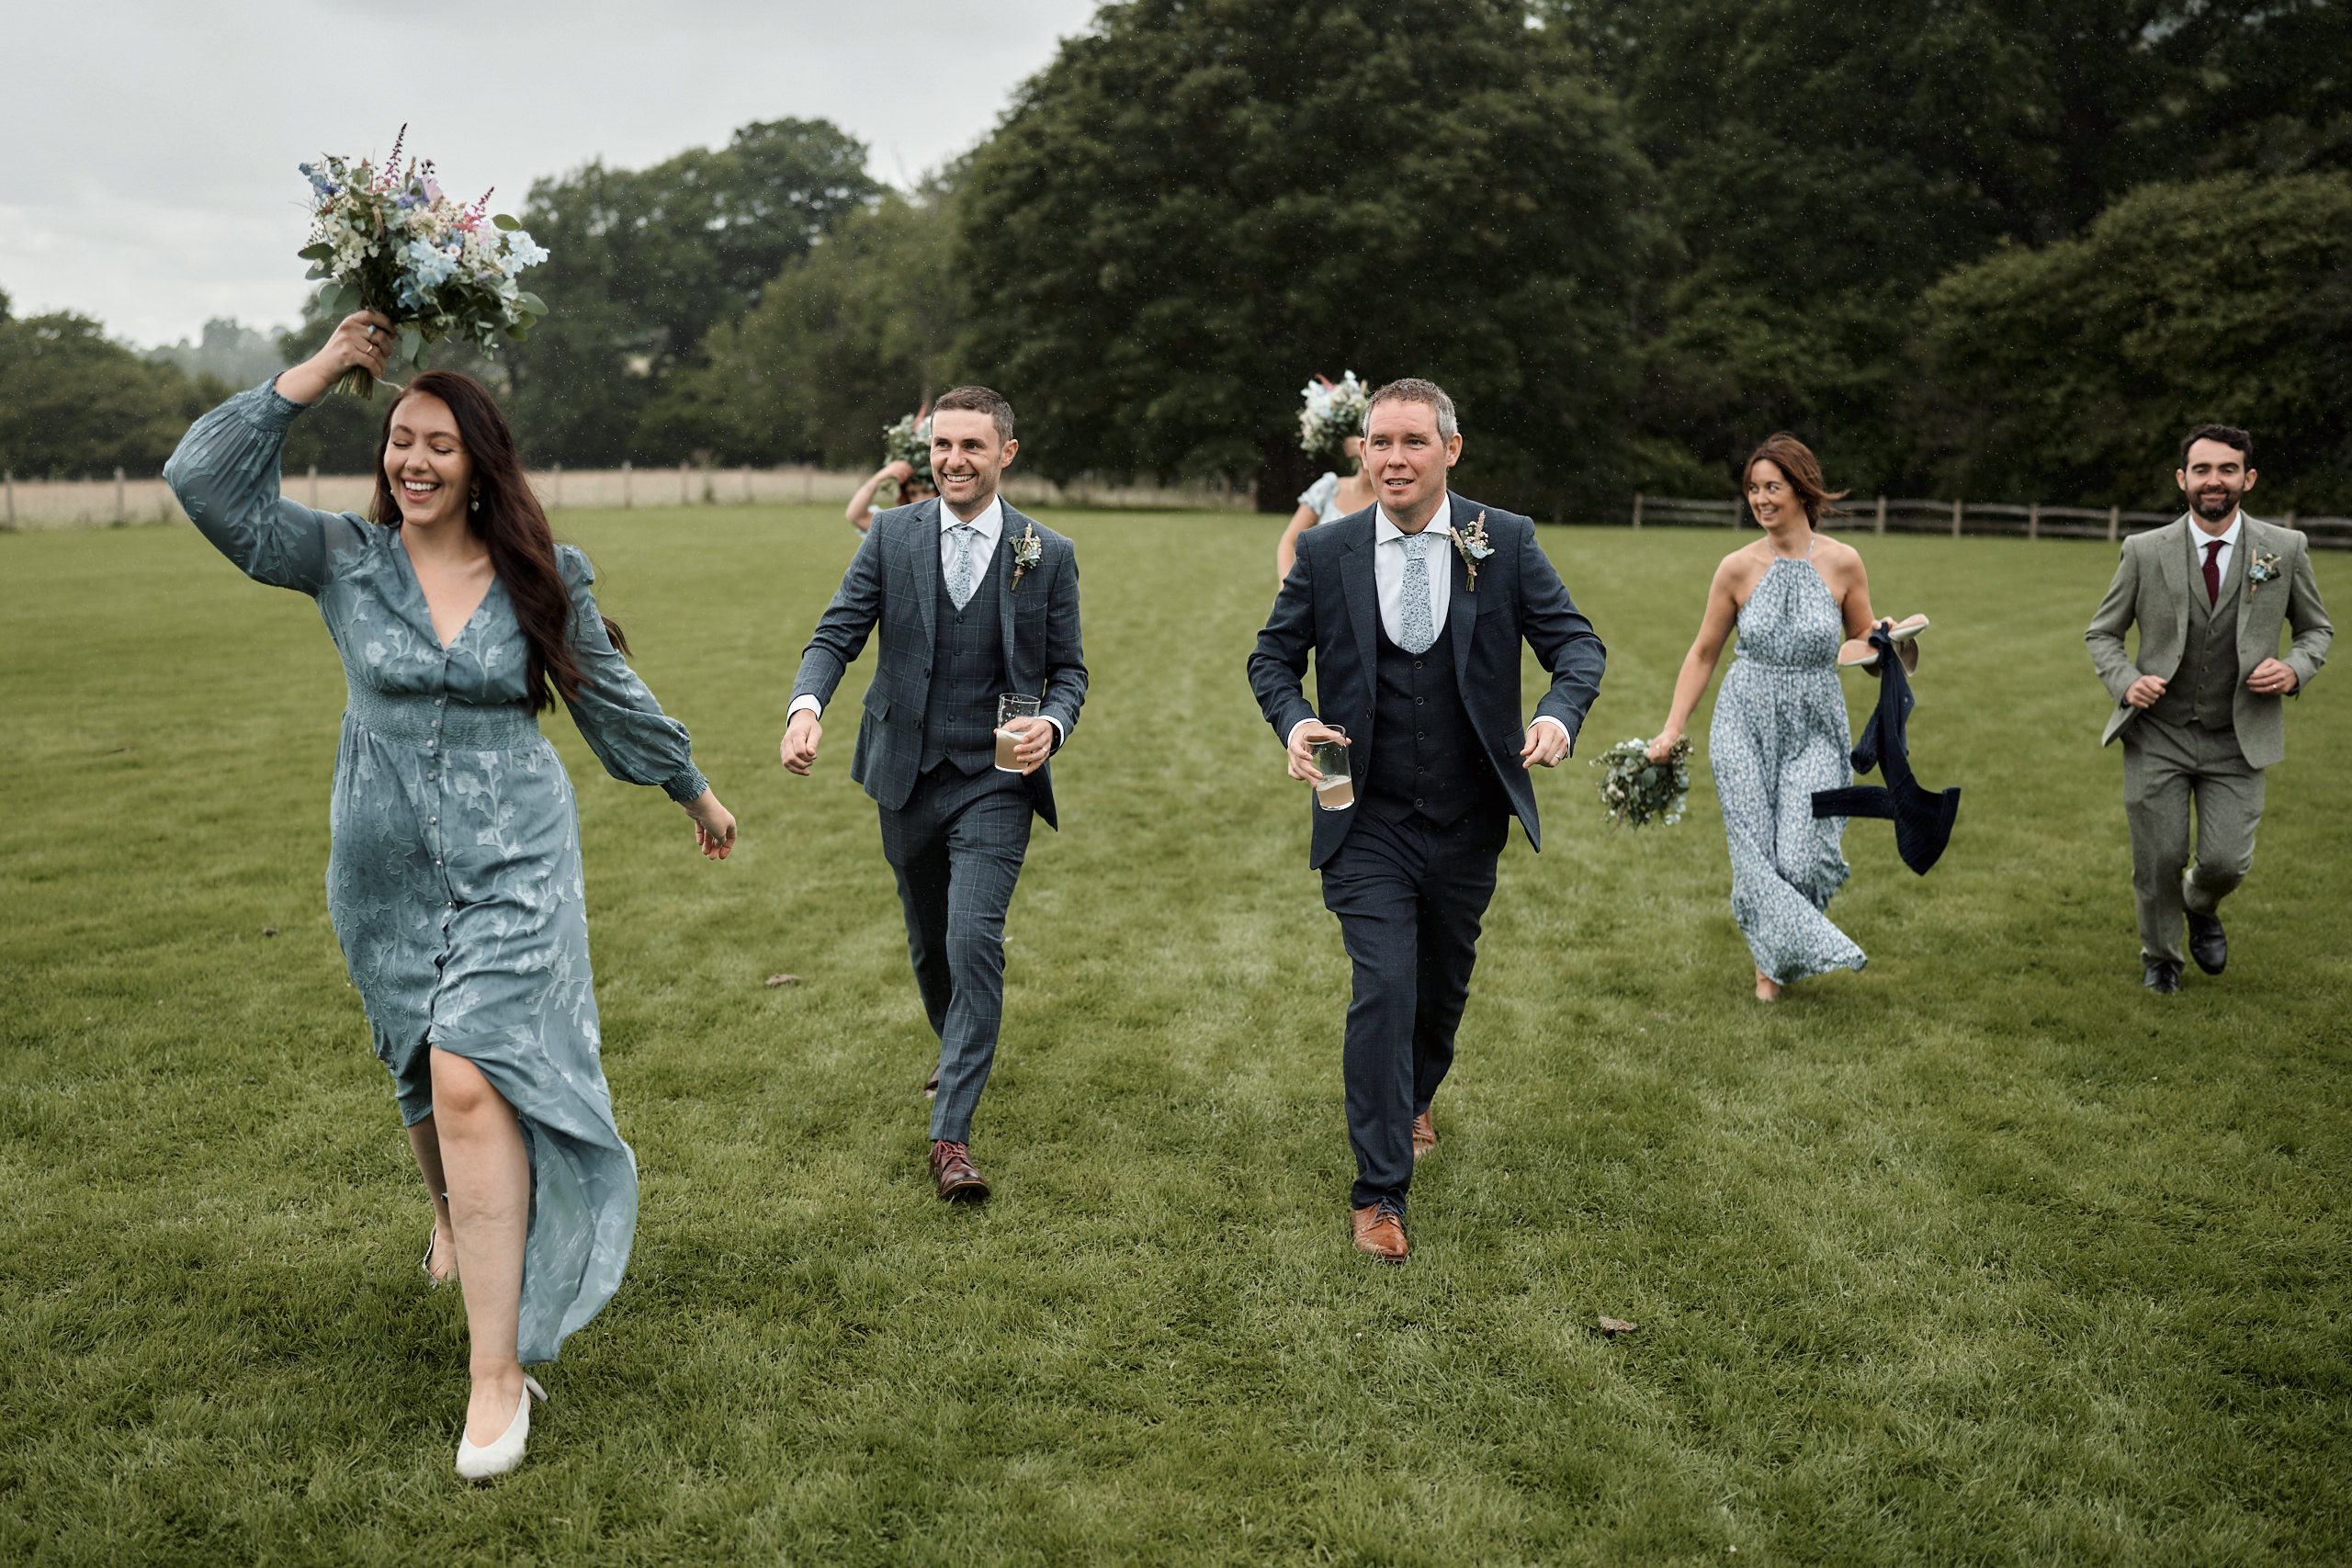 Some bridesmaids and groomsmen are running across a field.